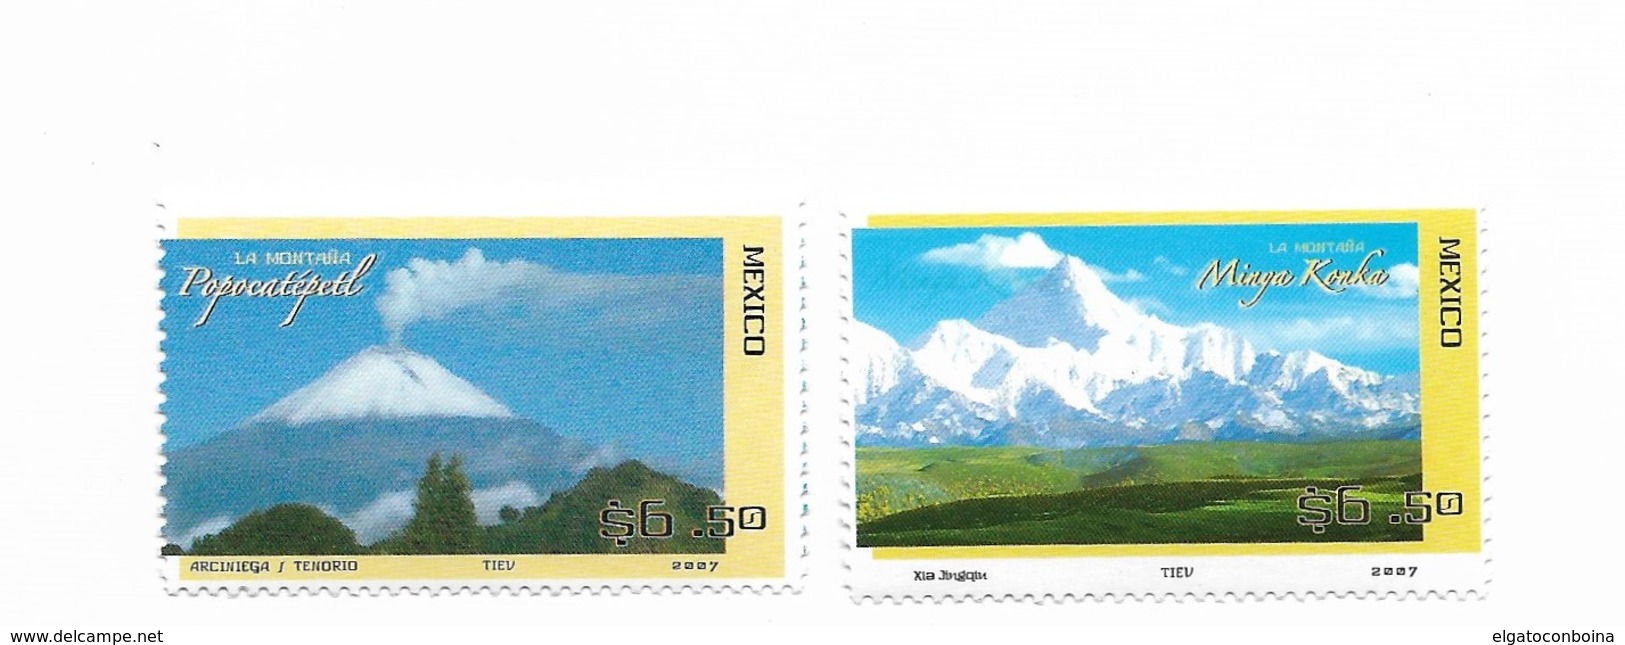 MEXICO 2007 VOLCANO, MOUNTAINS: POPOCATEPEL AND MINGA KONGA, JOINT ISSUE WITH CHINA 2 VALUES, COMPLETE - México